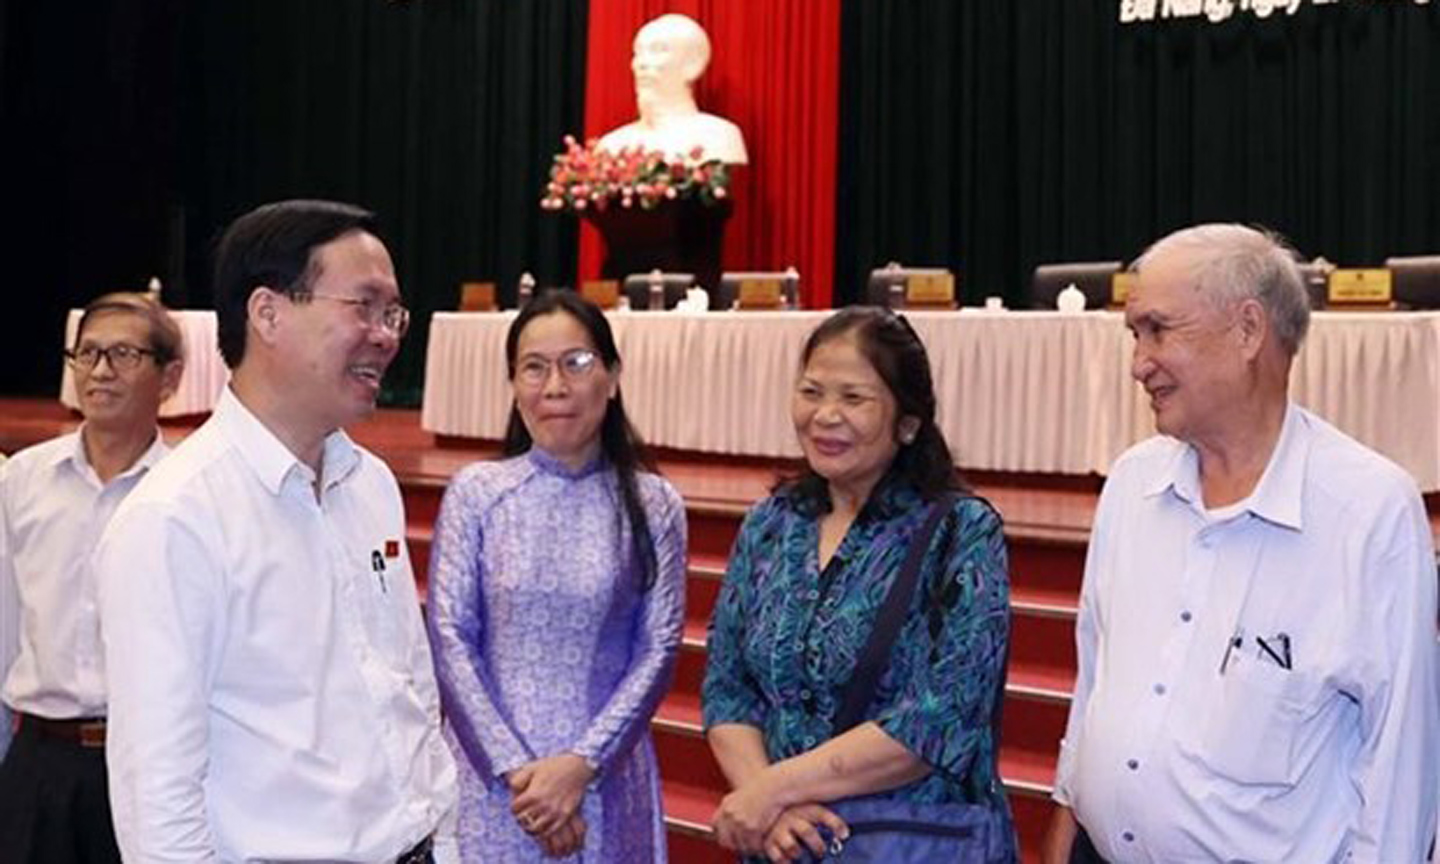  President Vo Van Thuong meets voters in the central city of Da Nang on April 27. (Photo: VNA)